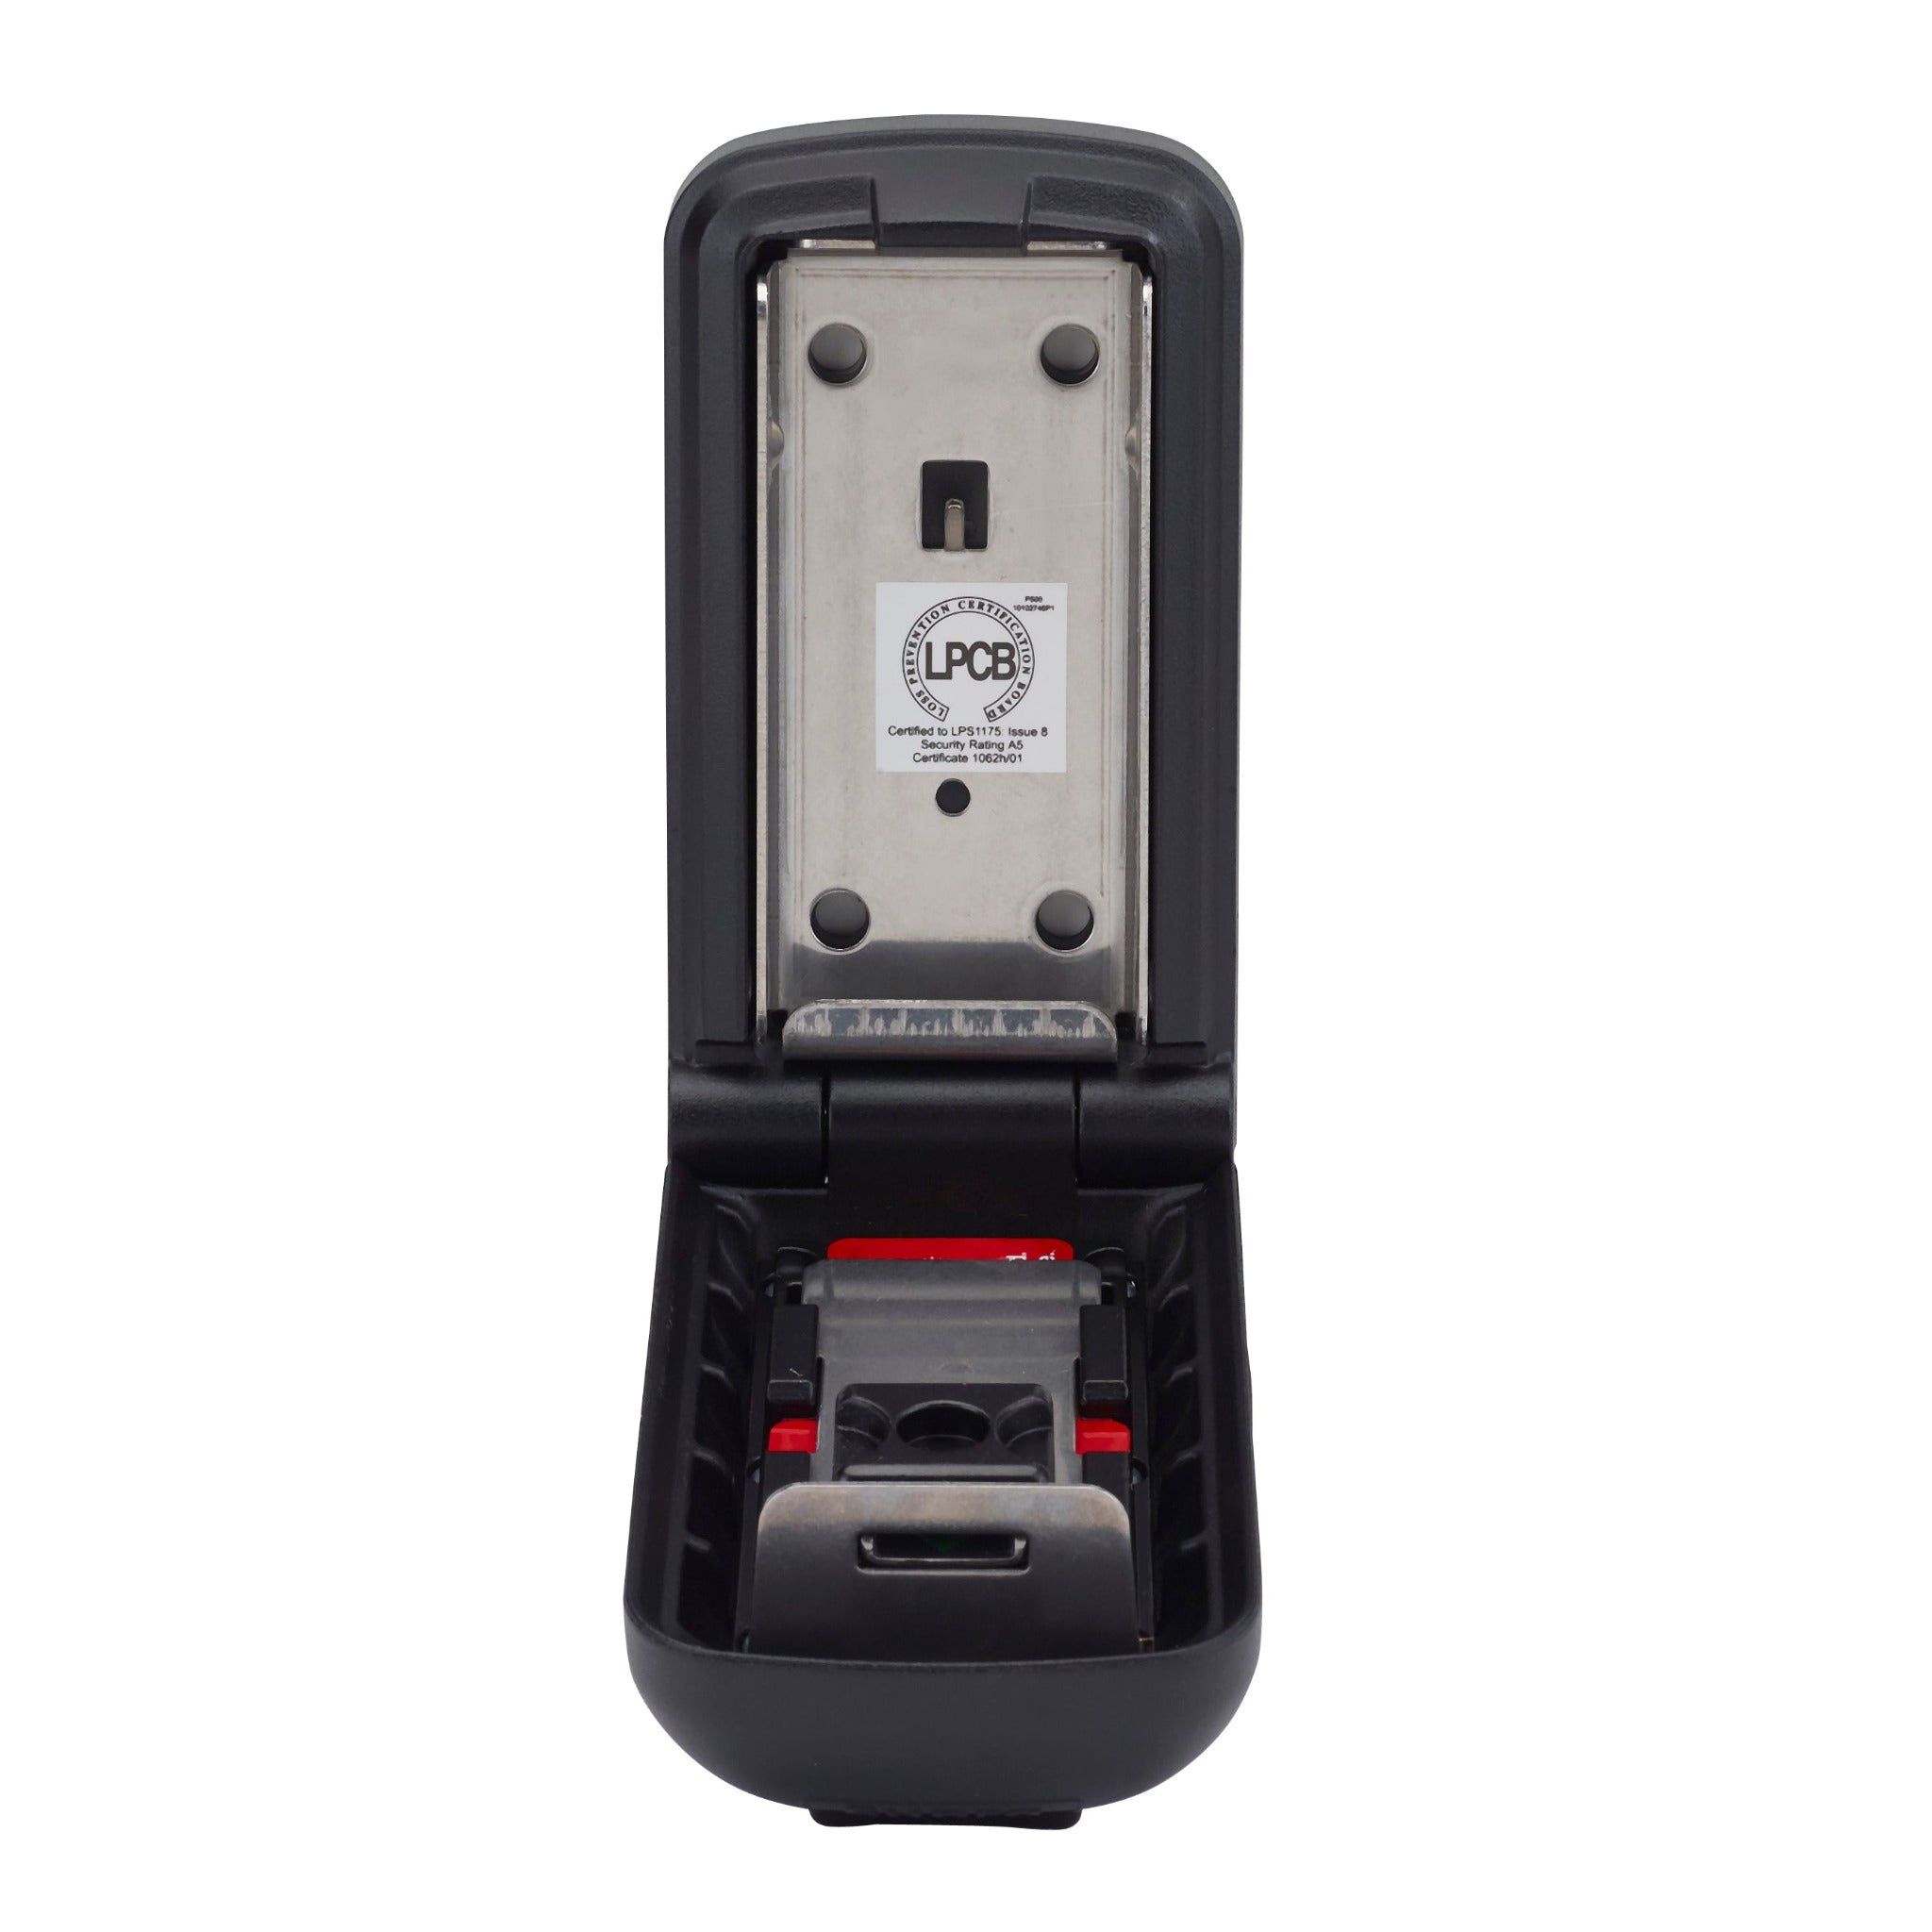 Open police preferred supra P500 pro key safe showing anti-tamper plate and LPCB Issue 8 A5 certification sticker